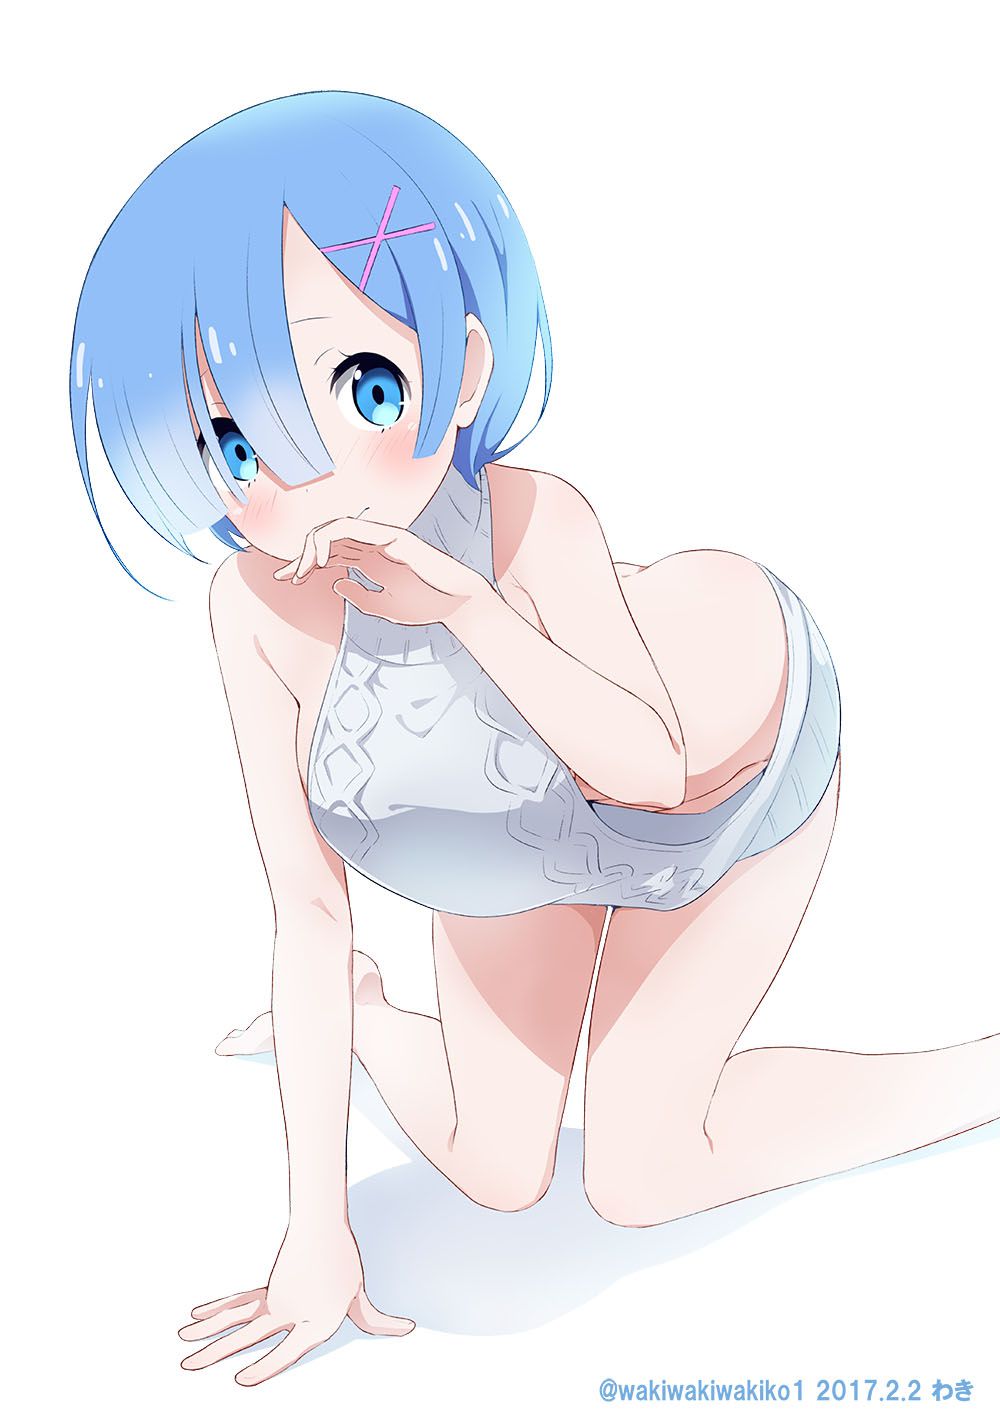 [2nd] Secondary erotic image of a girl with blue or light blue hair Part 7 [Blue hair] 21